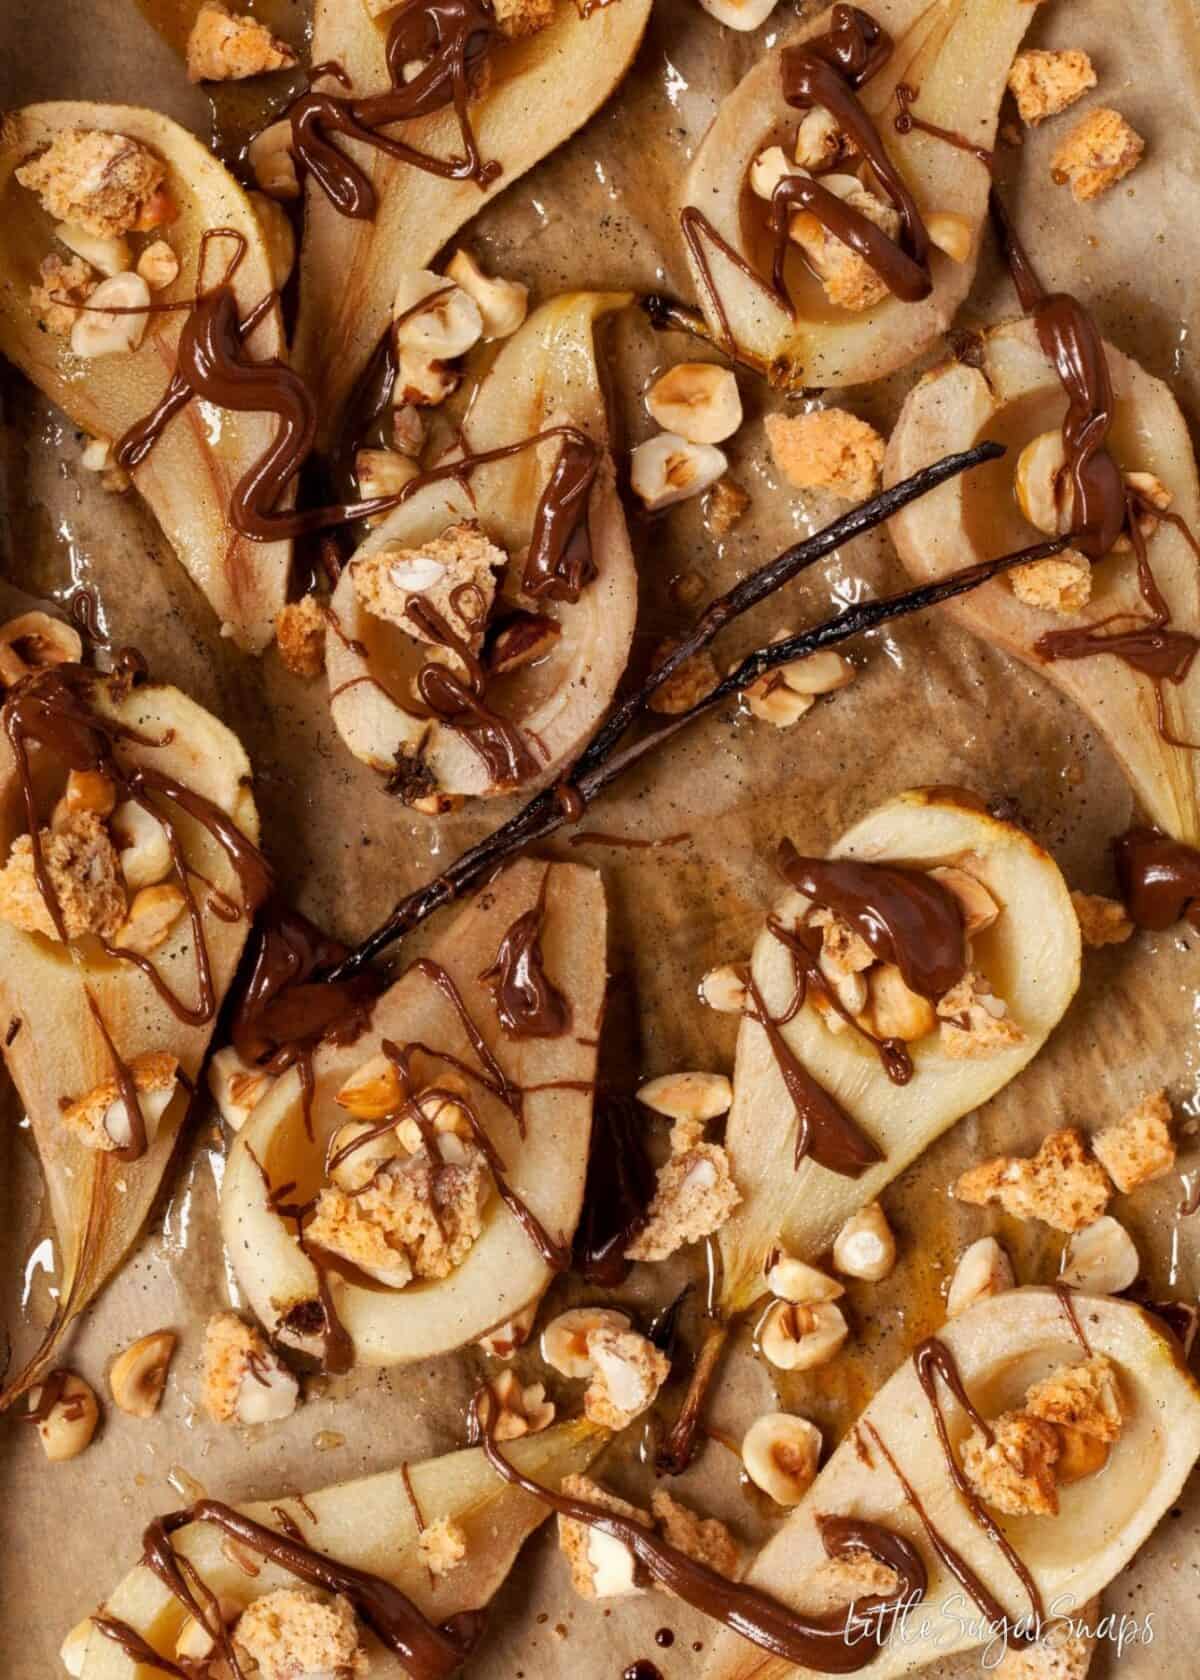 Honey Baked Pears with Chocolate on a baking sheet with hazelnuts and a vanilla pod